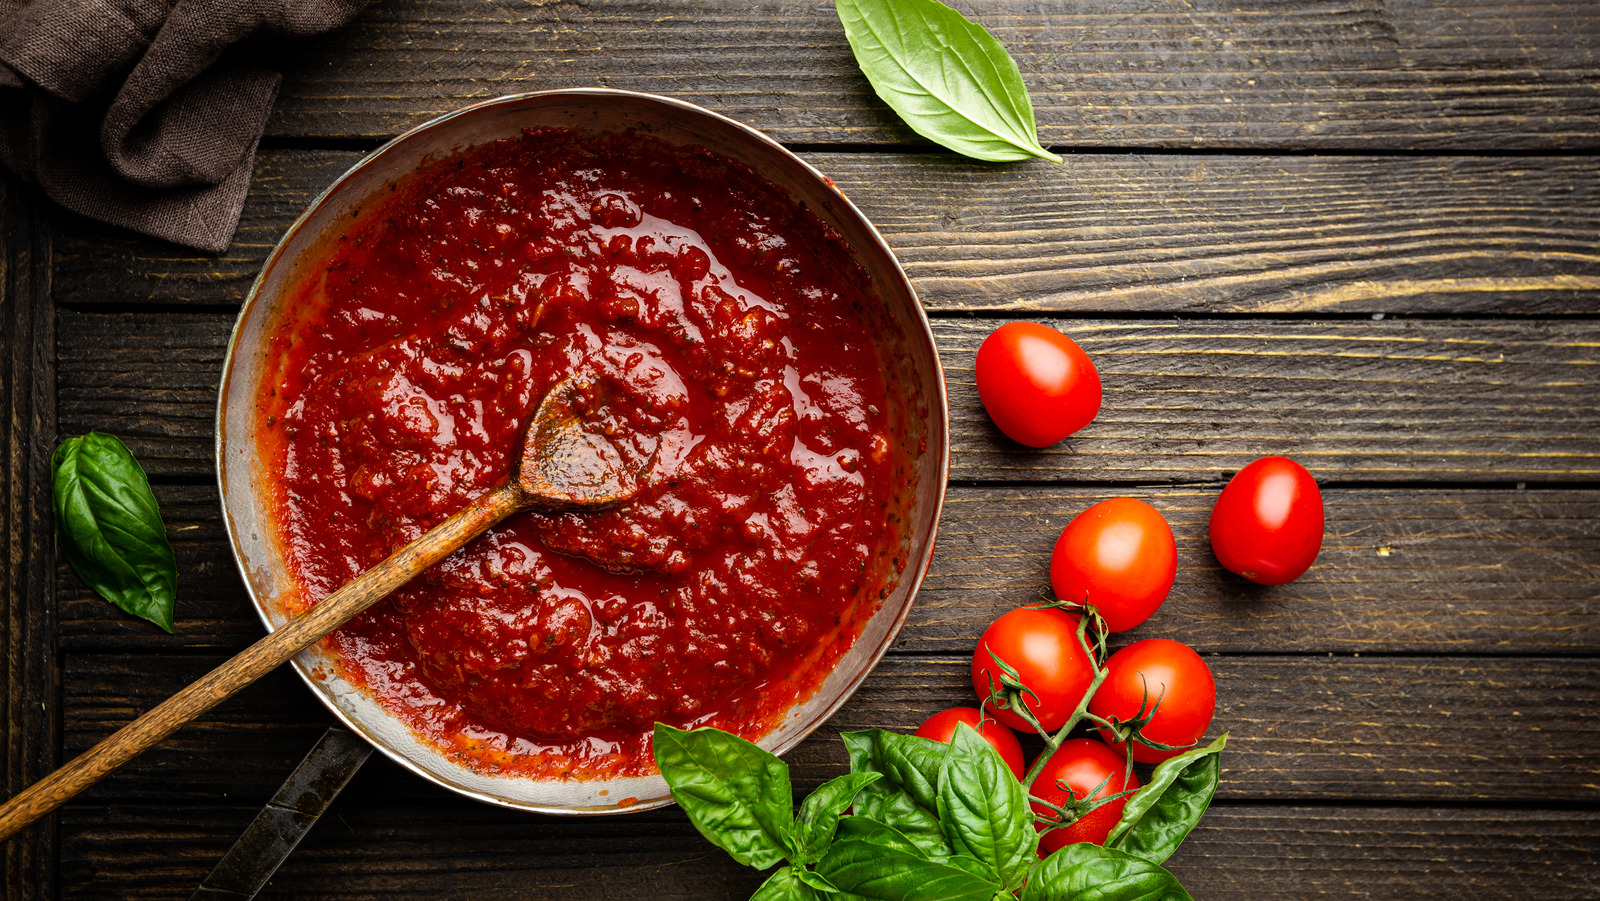 What Is The Best Jarred Pasta Sauce? — Exclusive Survey - Tasting Table